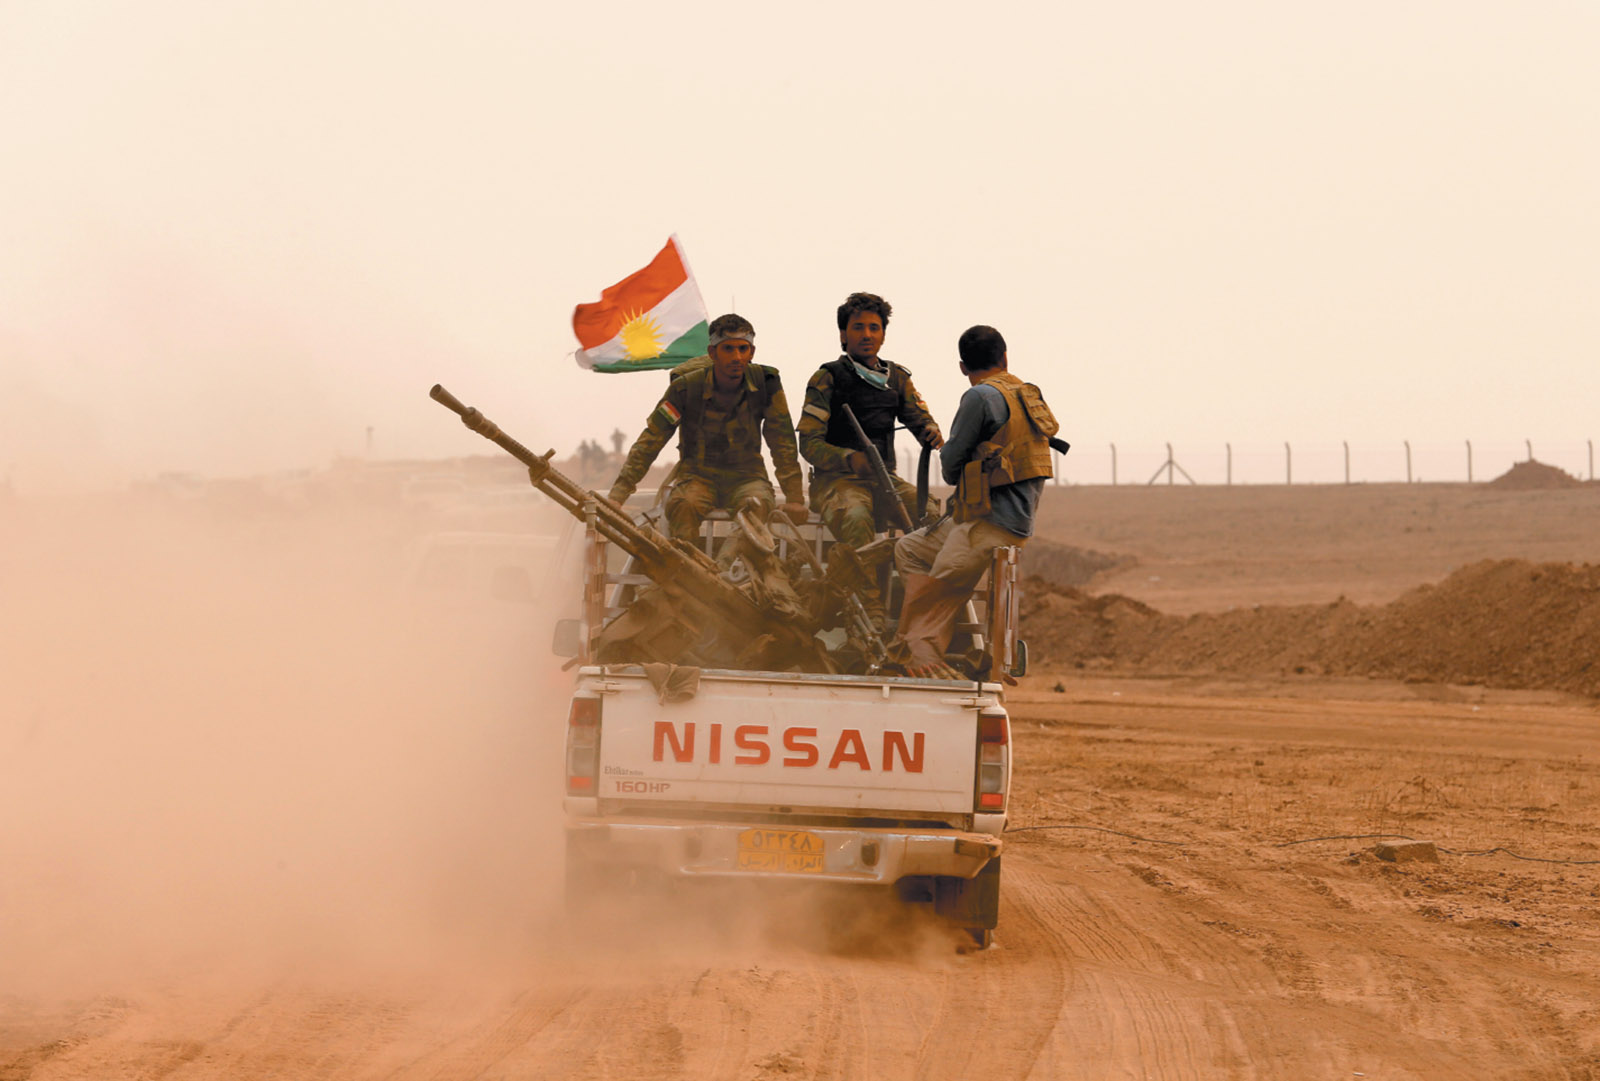 Kurdish peshmerga fighters at the front line during a battle with Islamic State militants near Mosul, Iraq, October 2016